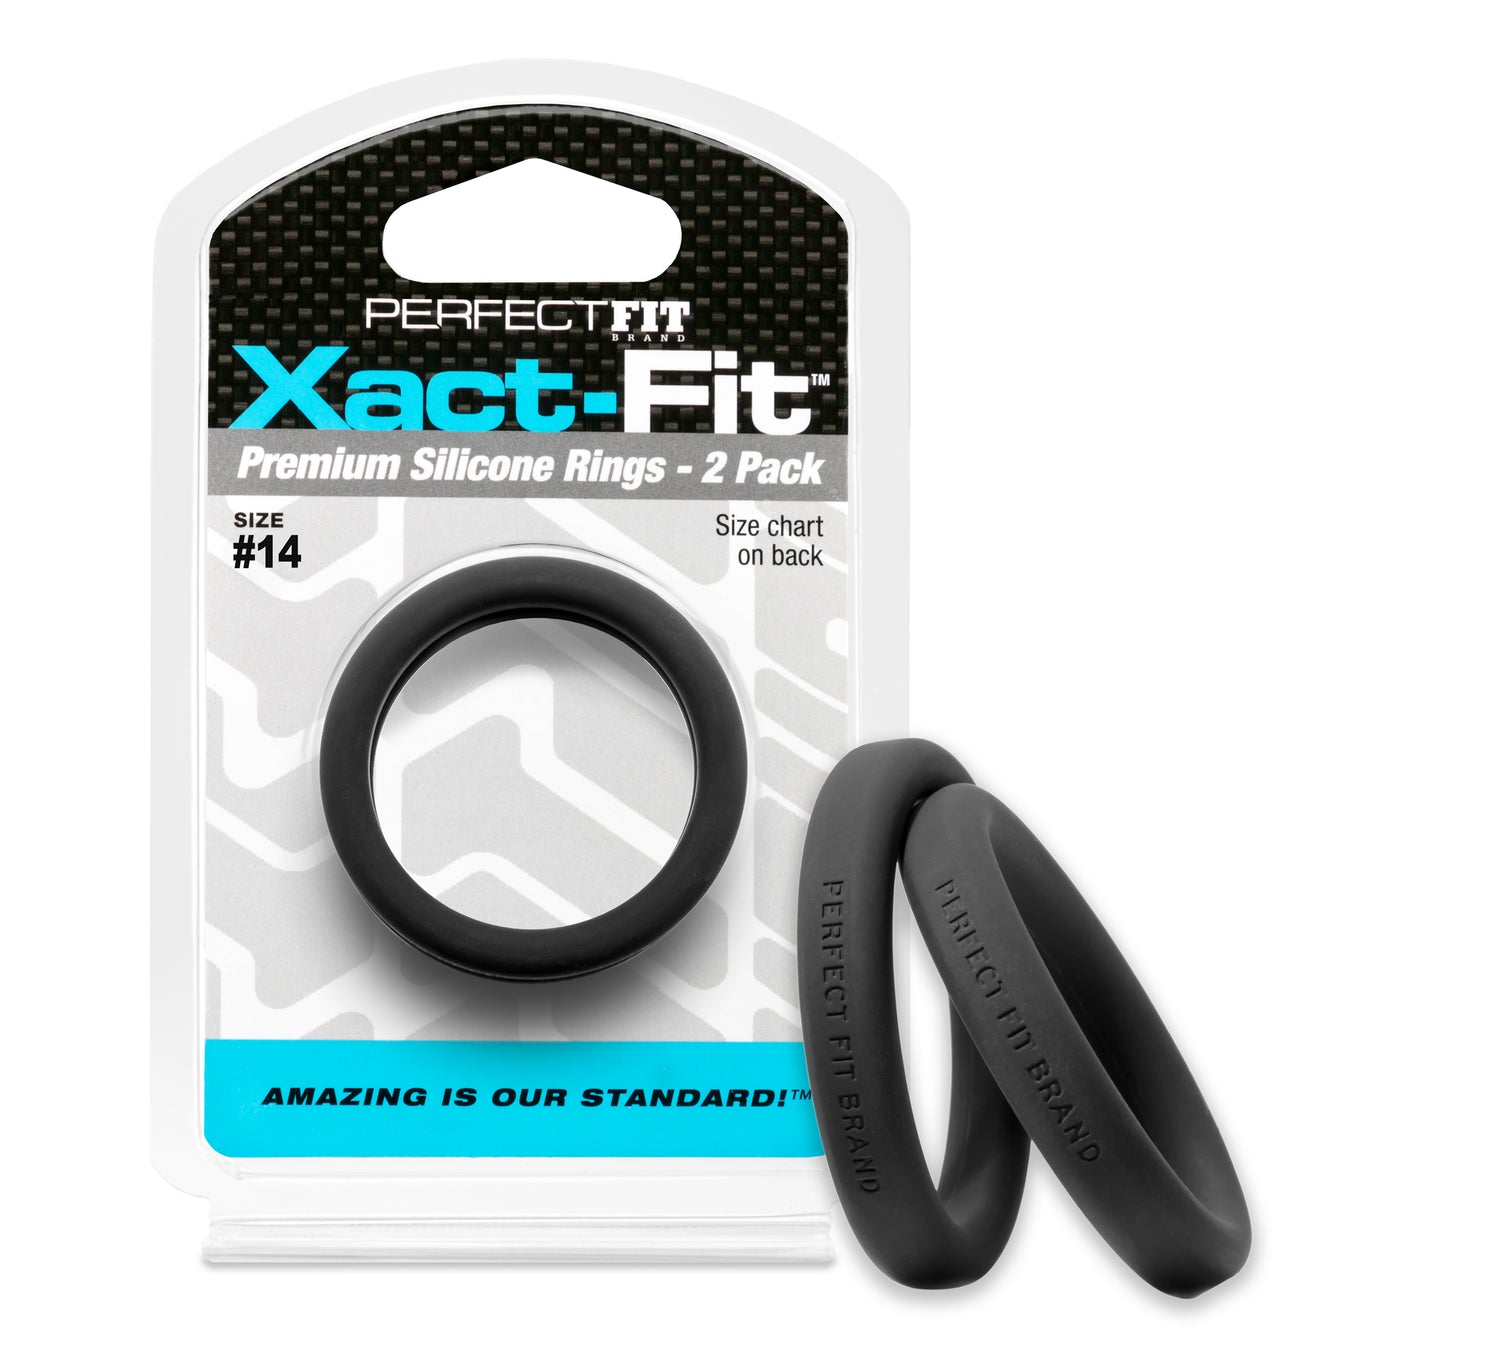 Xact-Fit #14 1.4in 2-Pack - Just for you desires